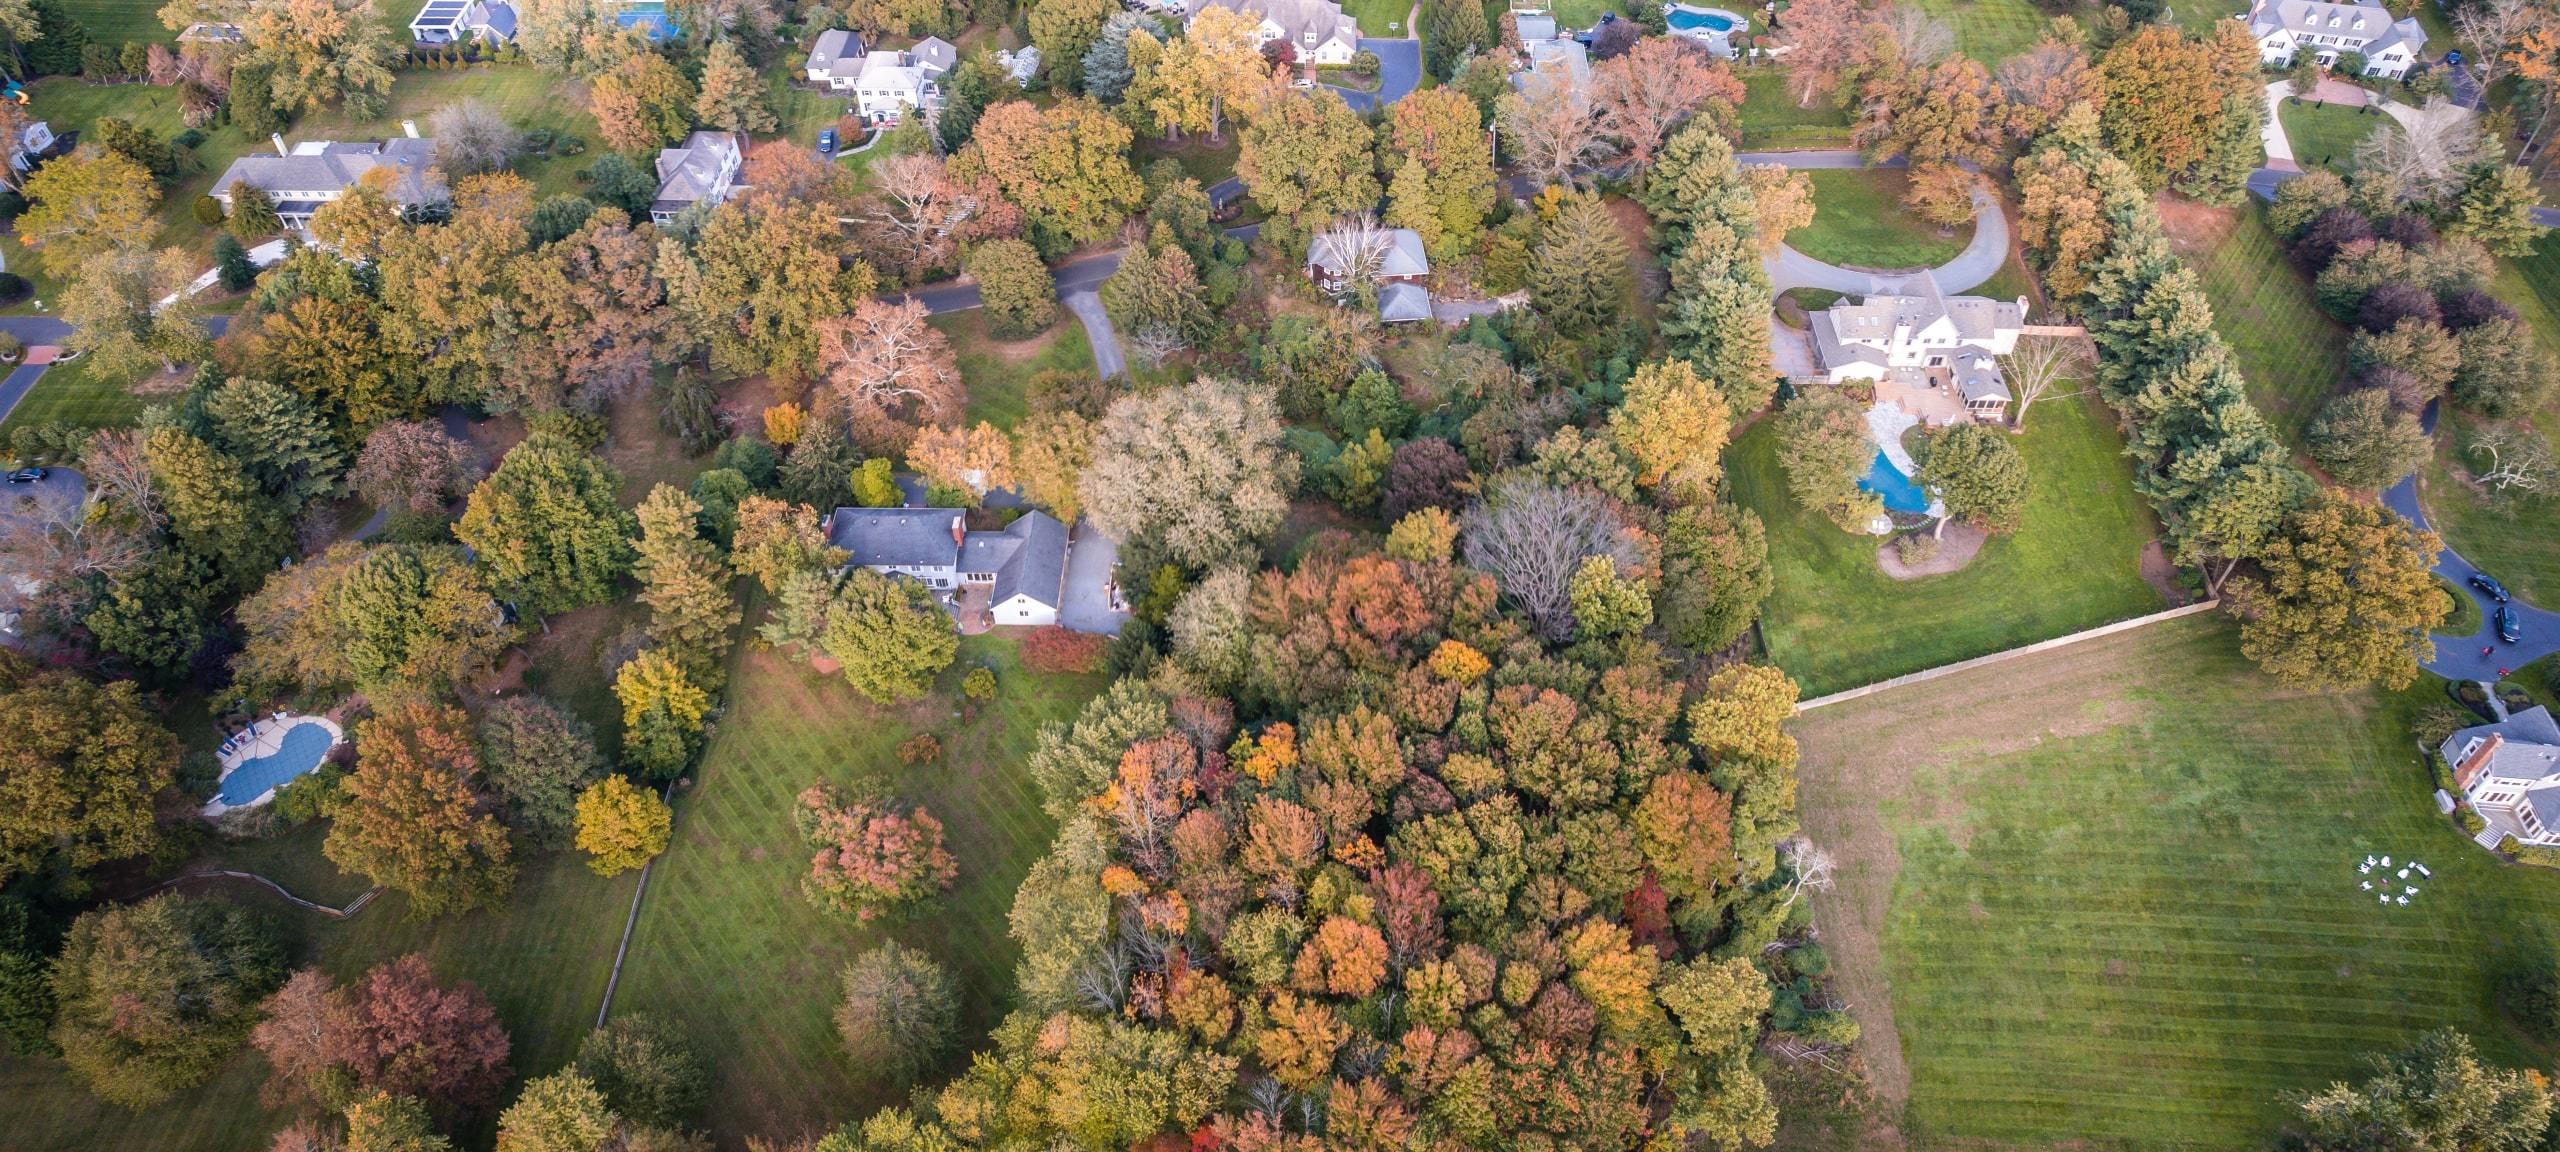 Aerial view of luxury homes near Little Silver, NJ